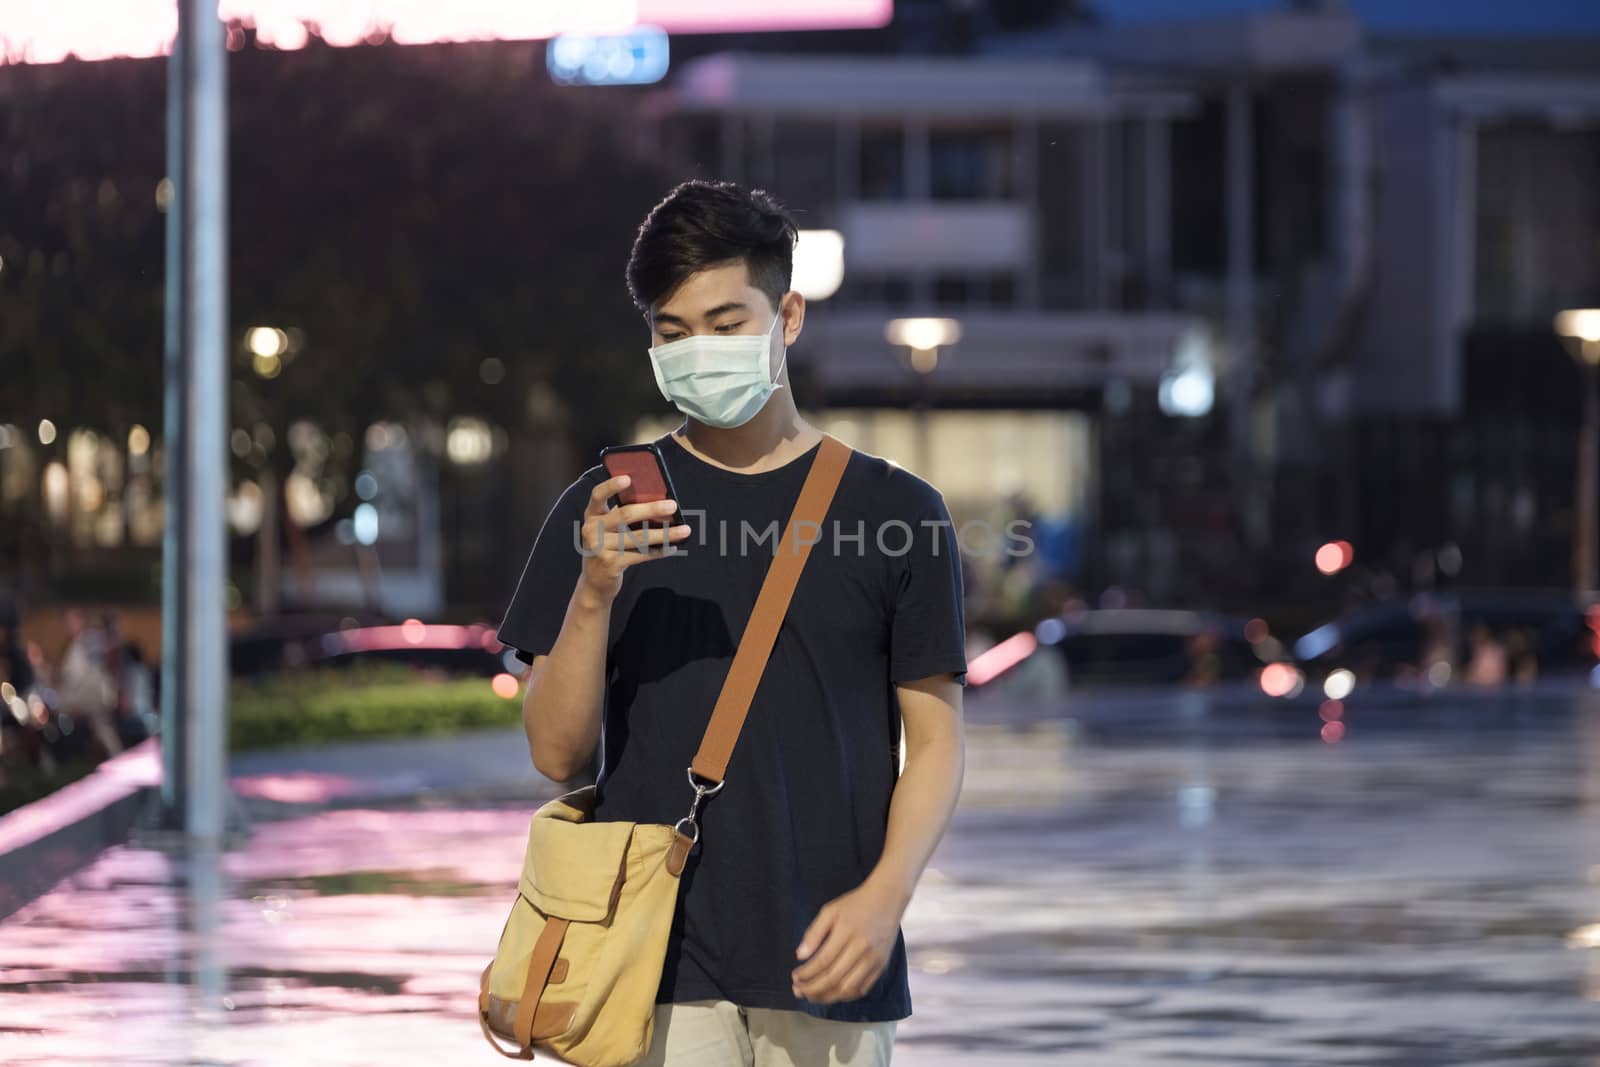 Young man with protective face mask using mobile phone in downtown city street prevent from the spread of viruses in the city. New normal concept.